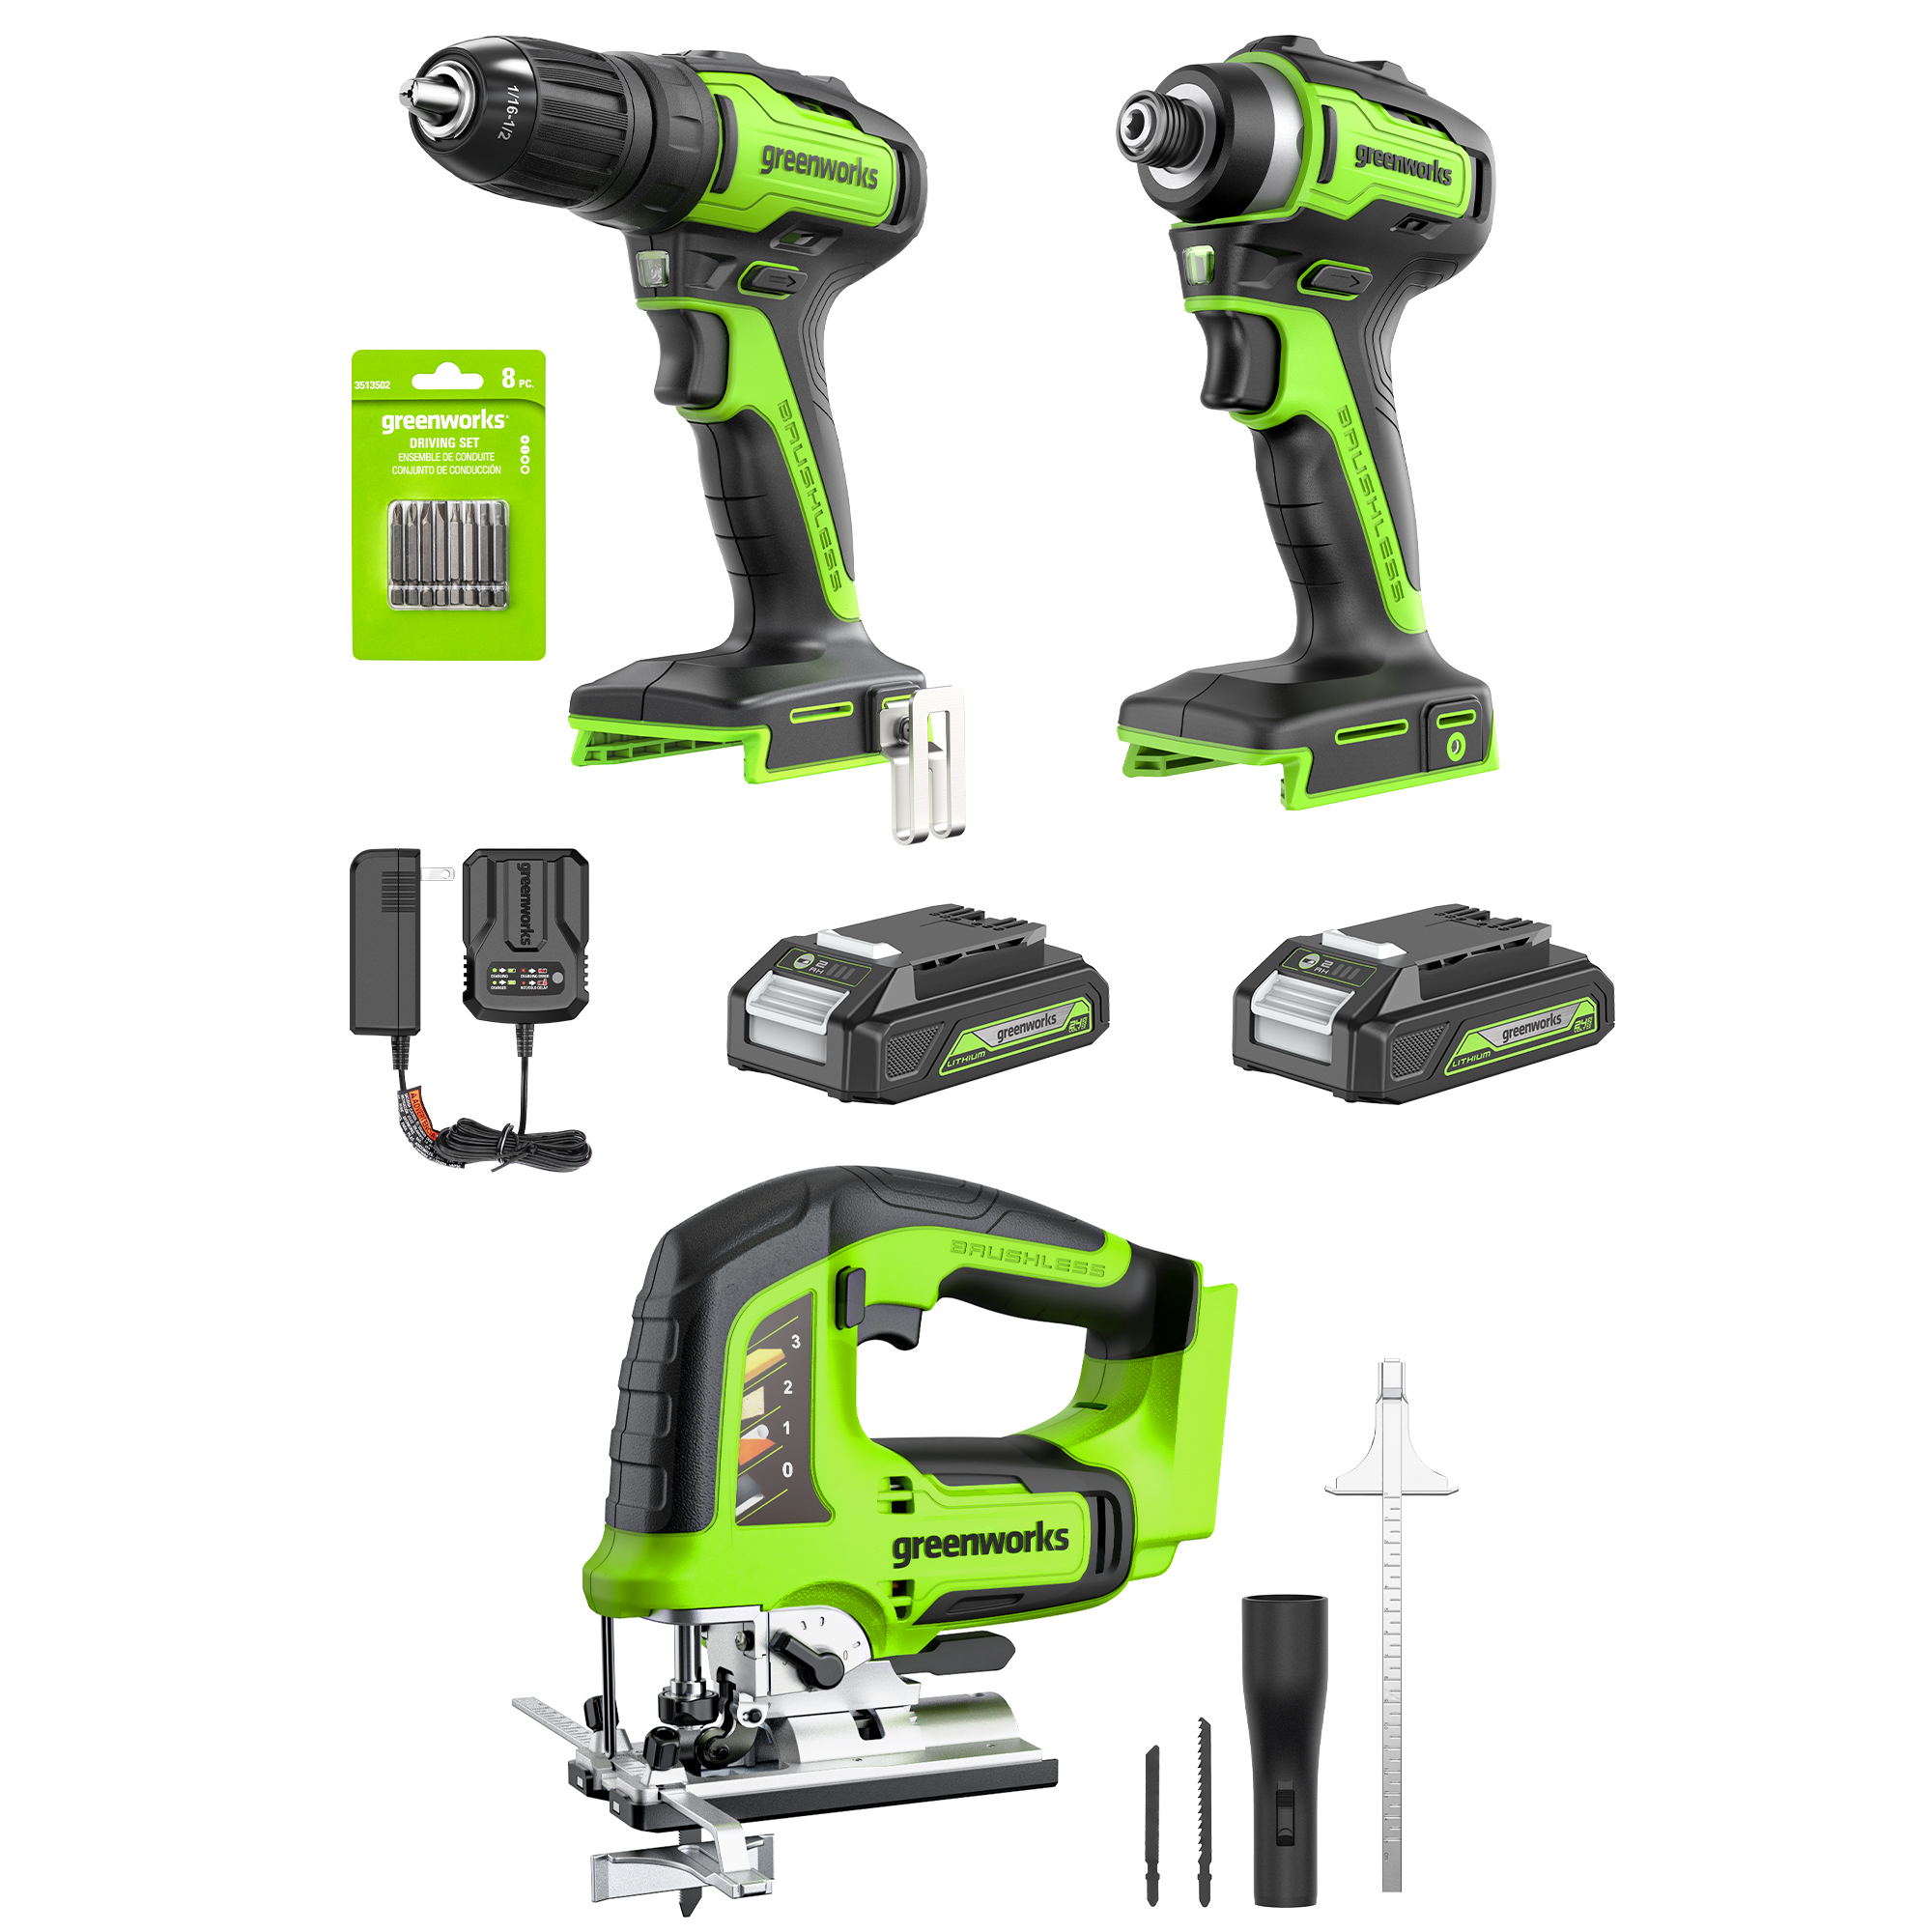 Greenworks New 24V Carpentry 3 Power Tool, Brushless Drill Driver Combo Kit with Two 2Ah Batteries & Charger - image 1 of 7